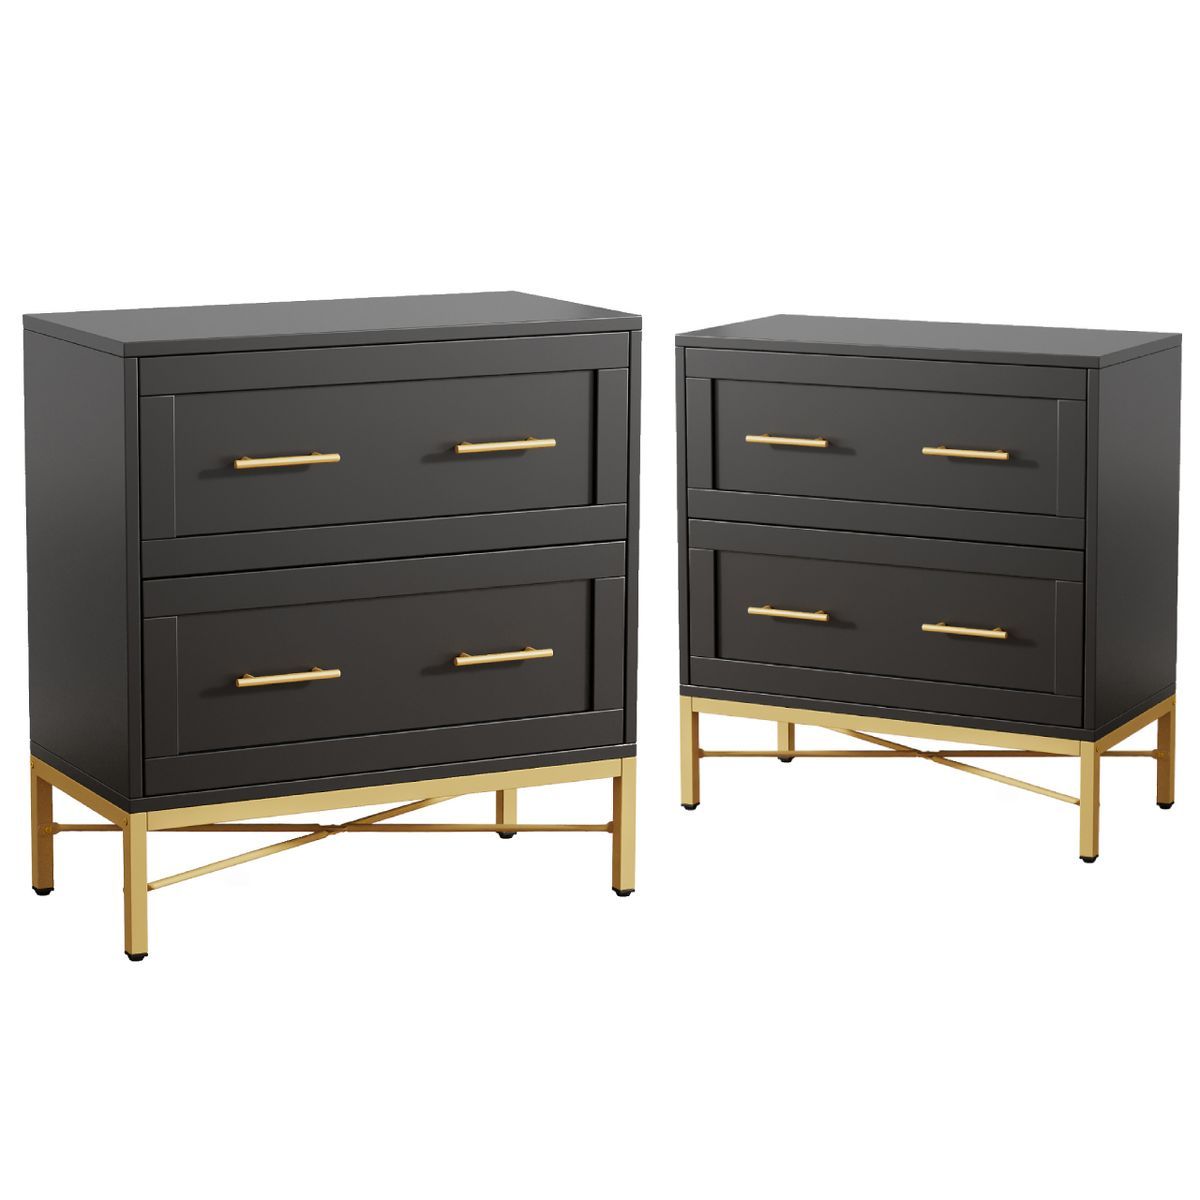 Tribesigns 2 Drawer File Cabinet, Modern Lateral Filing Cabinet | Target